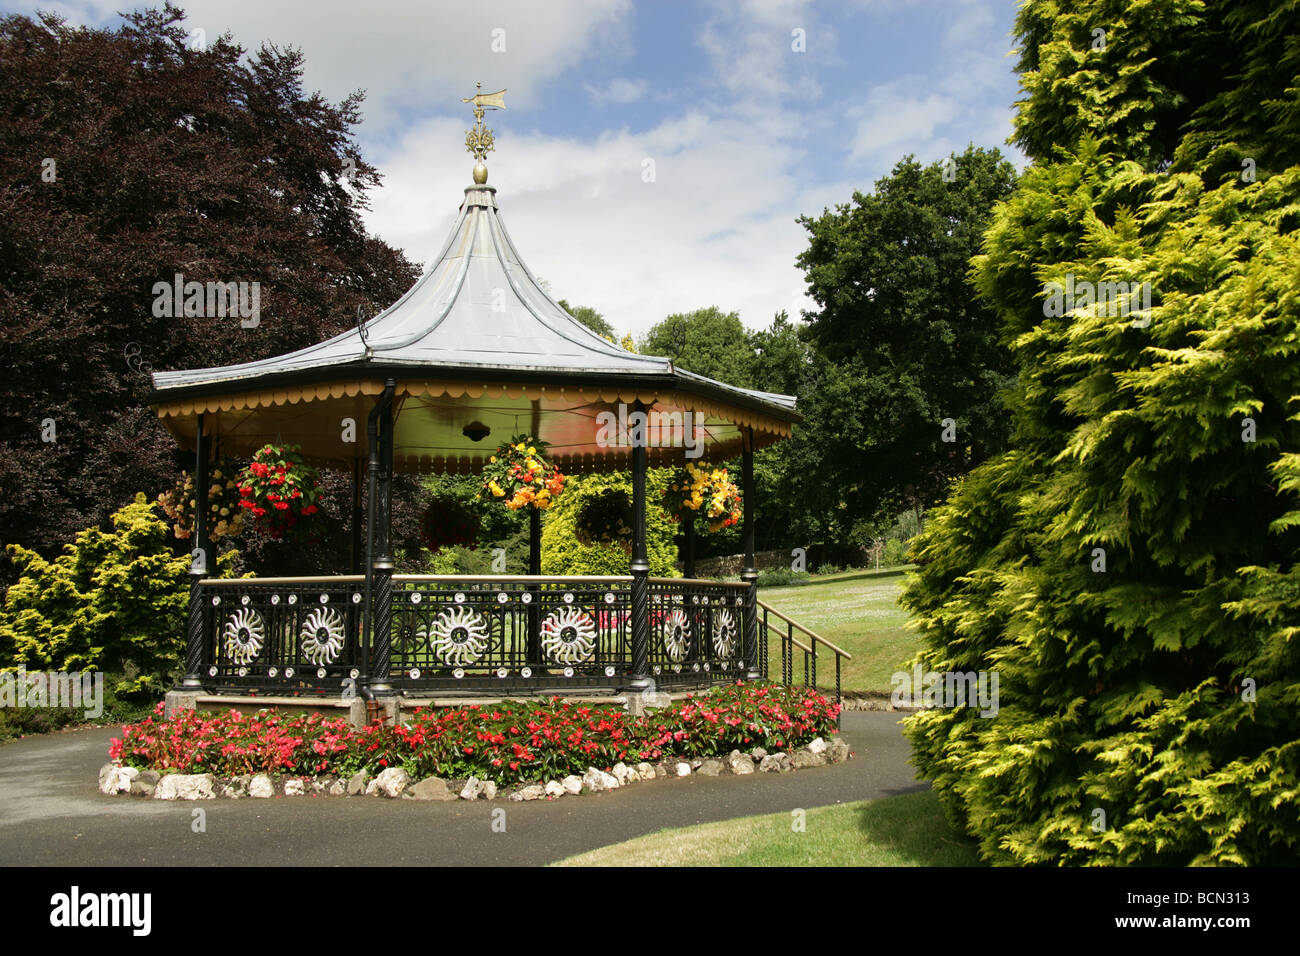 City of Truro, England. Picturesque scene of the Victorian bandstand which is located in Truro’s Victoria Gardens. Stock Photo